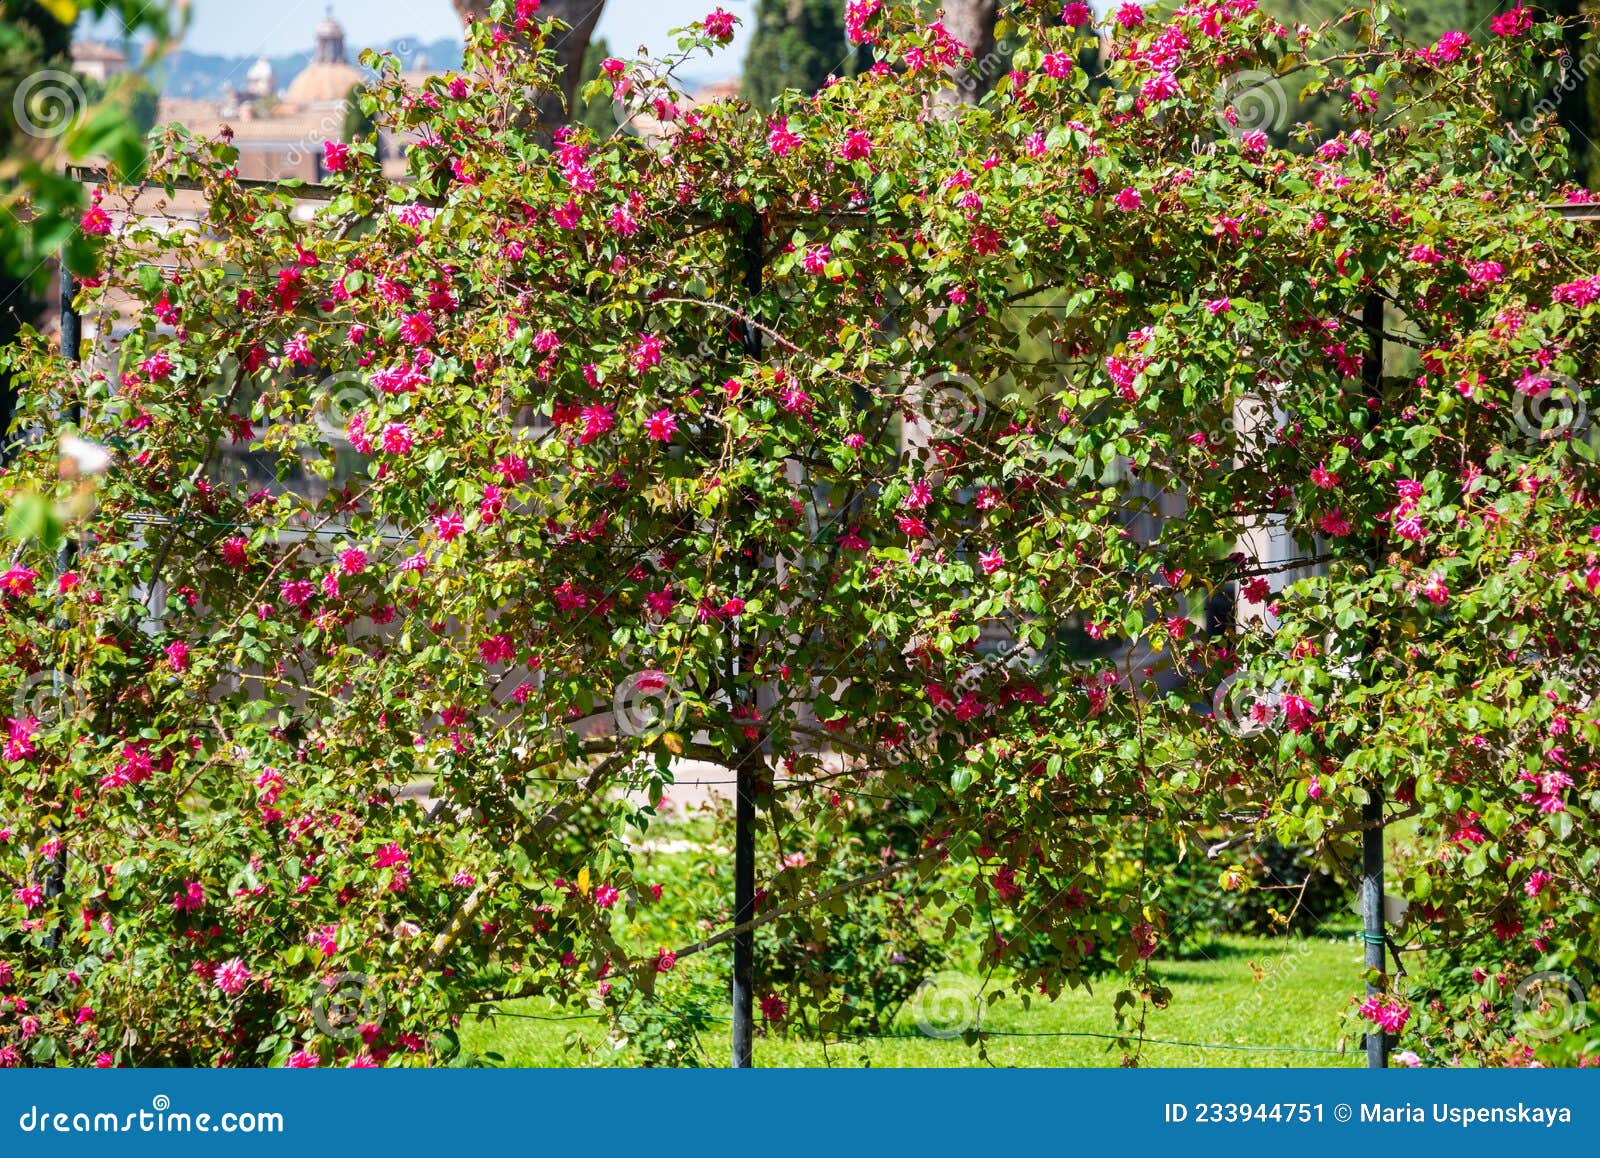 Beautiful Roses Blooming in a Garden in Spring Stock Image - Image of ...